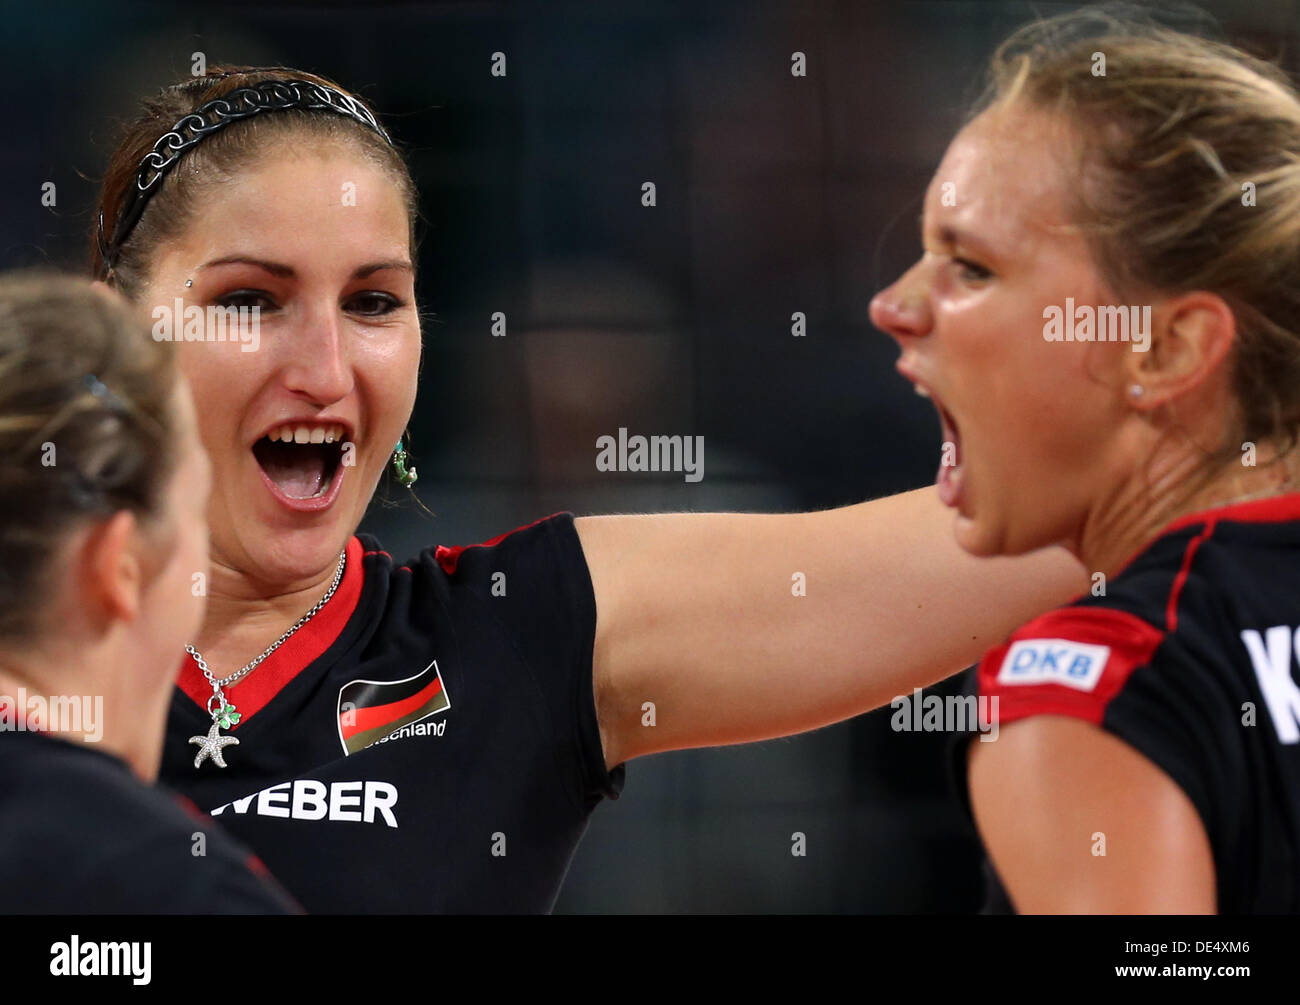 Corina Ssuschke-Voigt (L-R) and Margareta Anna Kozuch of Germany celebrate during their women's CEV Volleyball European Championship quarterfinal match between Germany and Croatia at Gerry Weber Stadium in Halle/Westphalia, Germany, 11 September 2013. Photo: Friso Gentsch/dpa +++(c) dpa - Bildfunk+++ Stock Photo